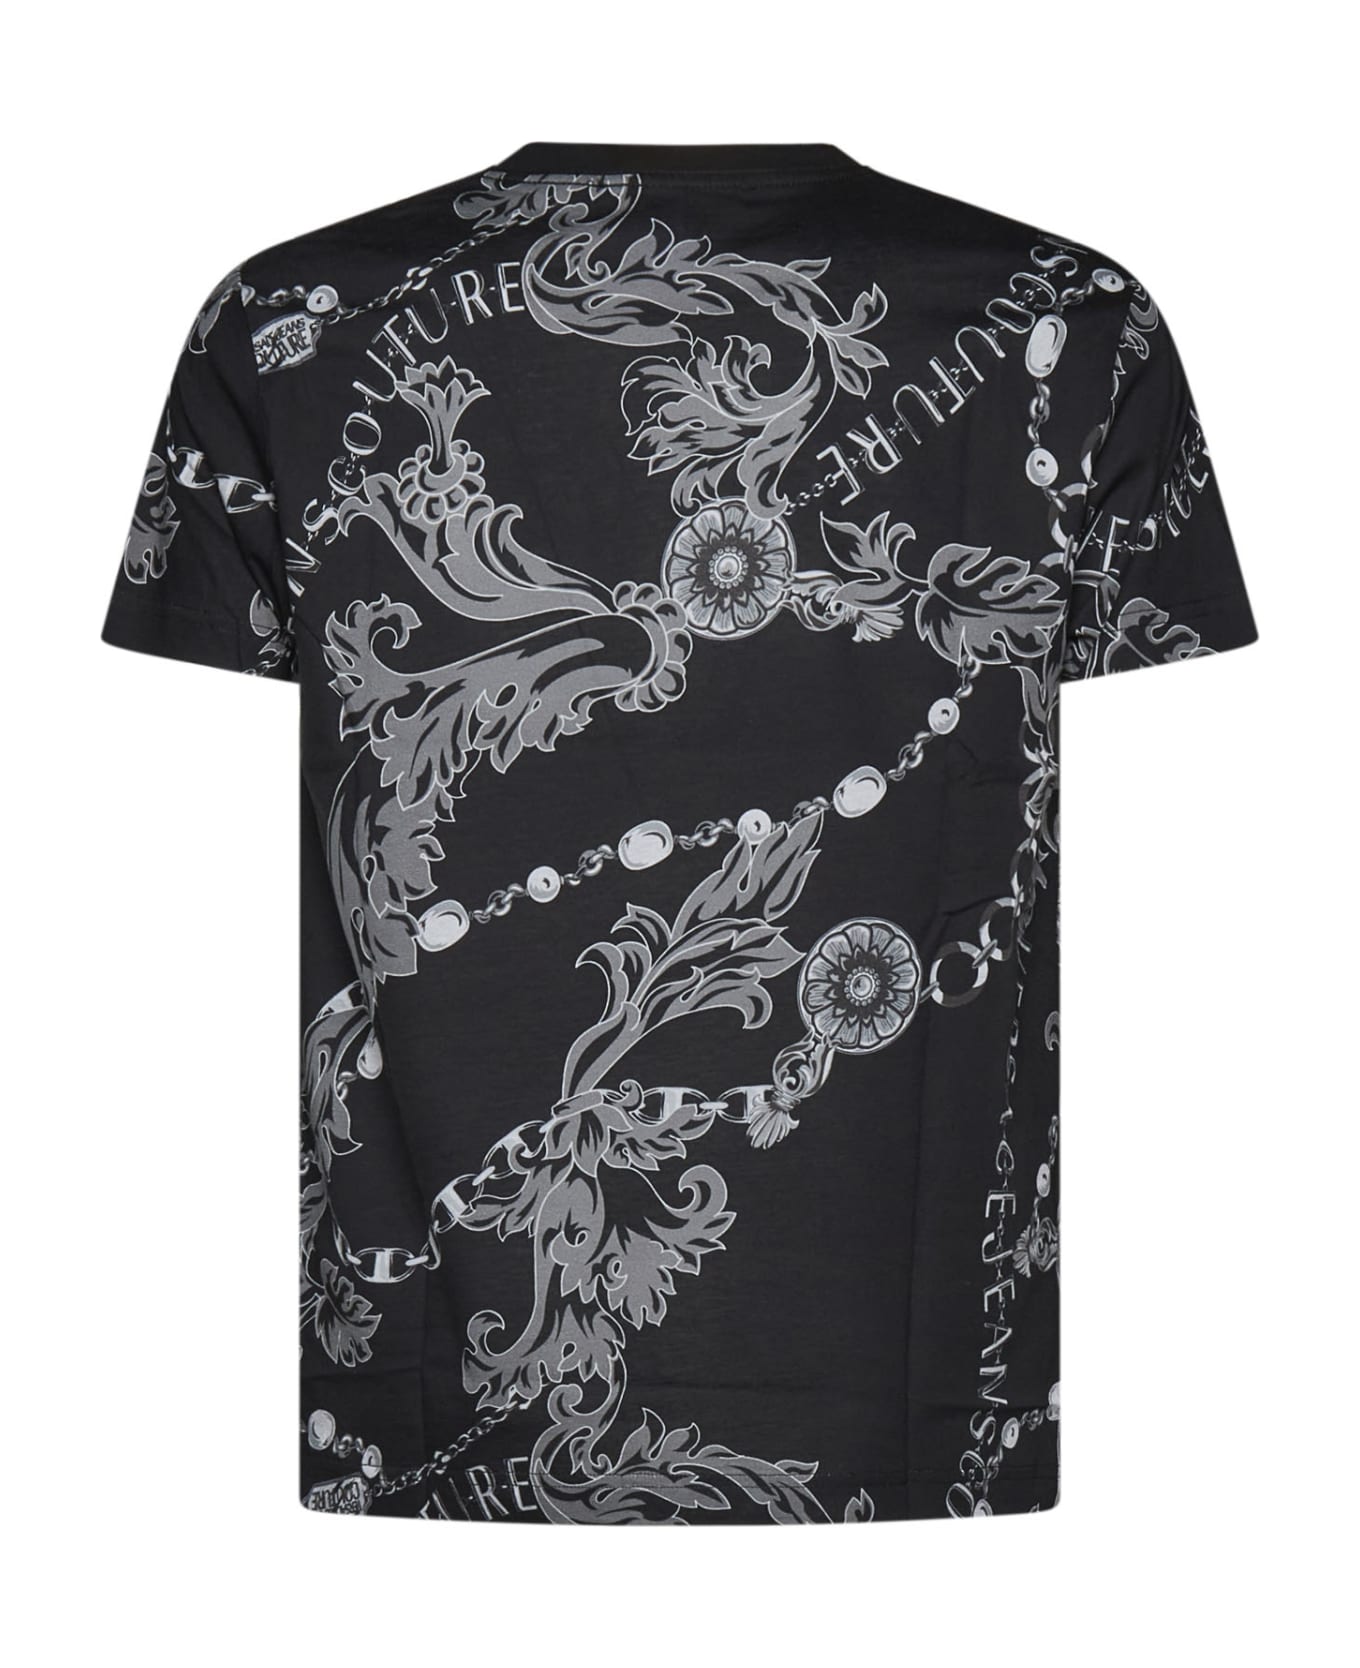 Versace Jeans Couture Chain Couture T-shirt - Black シャツ